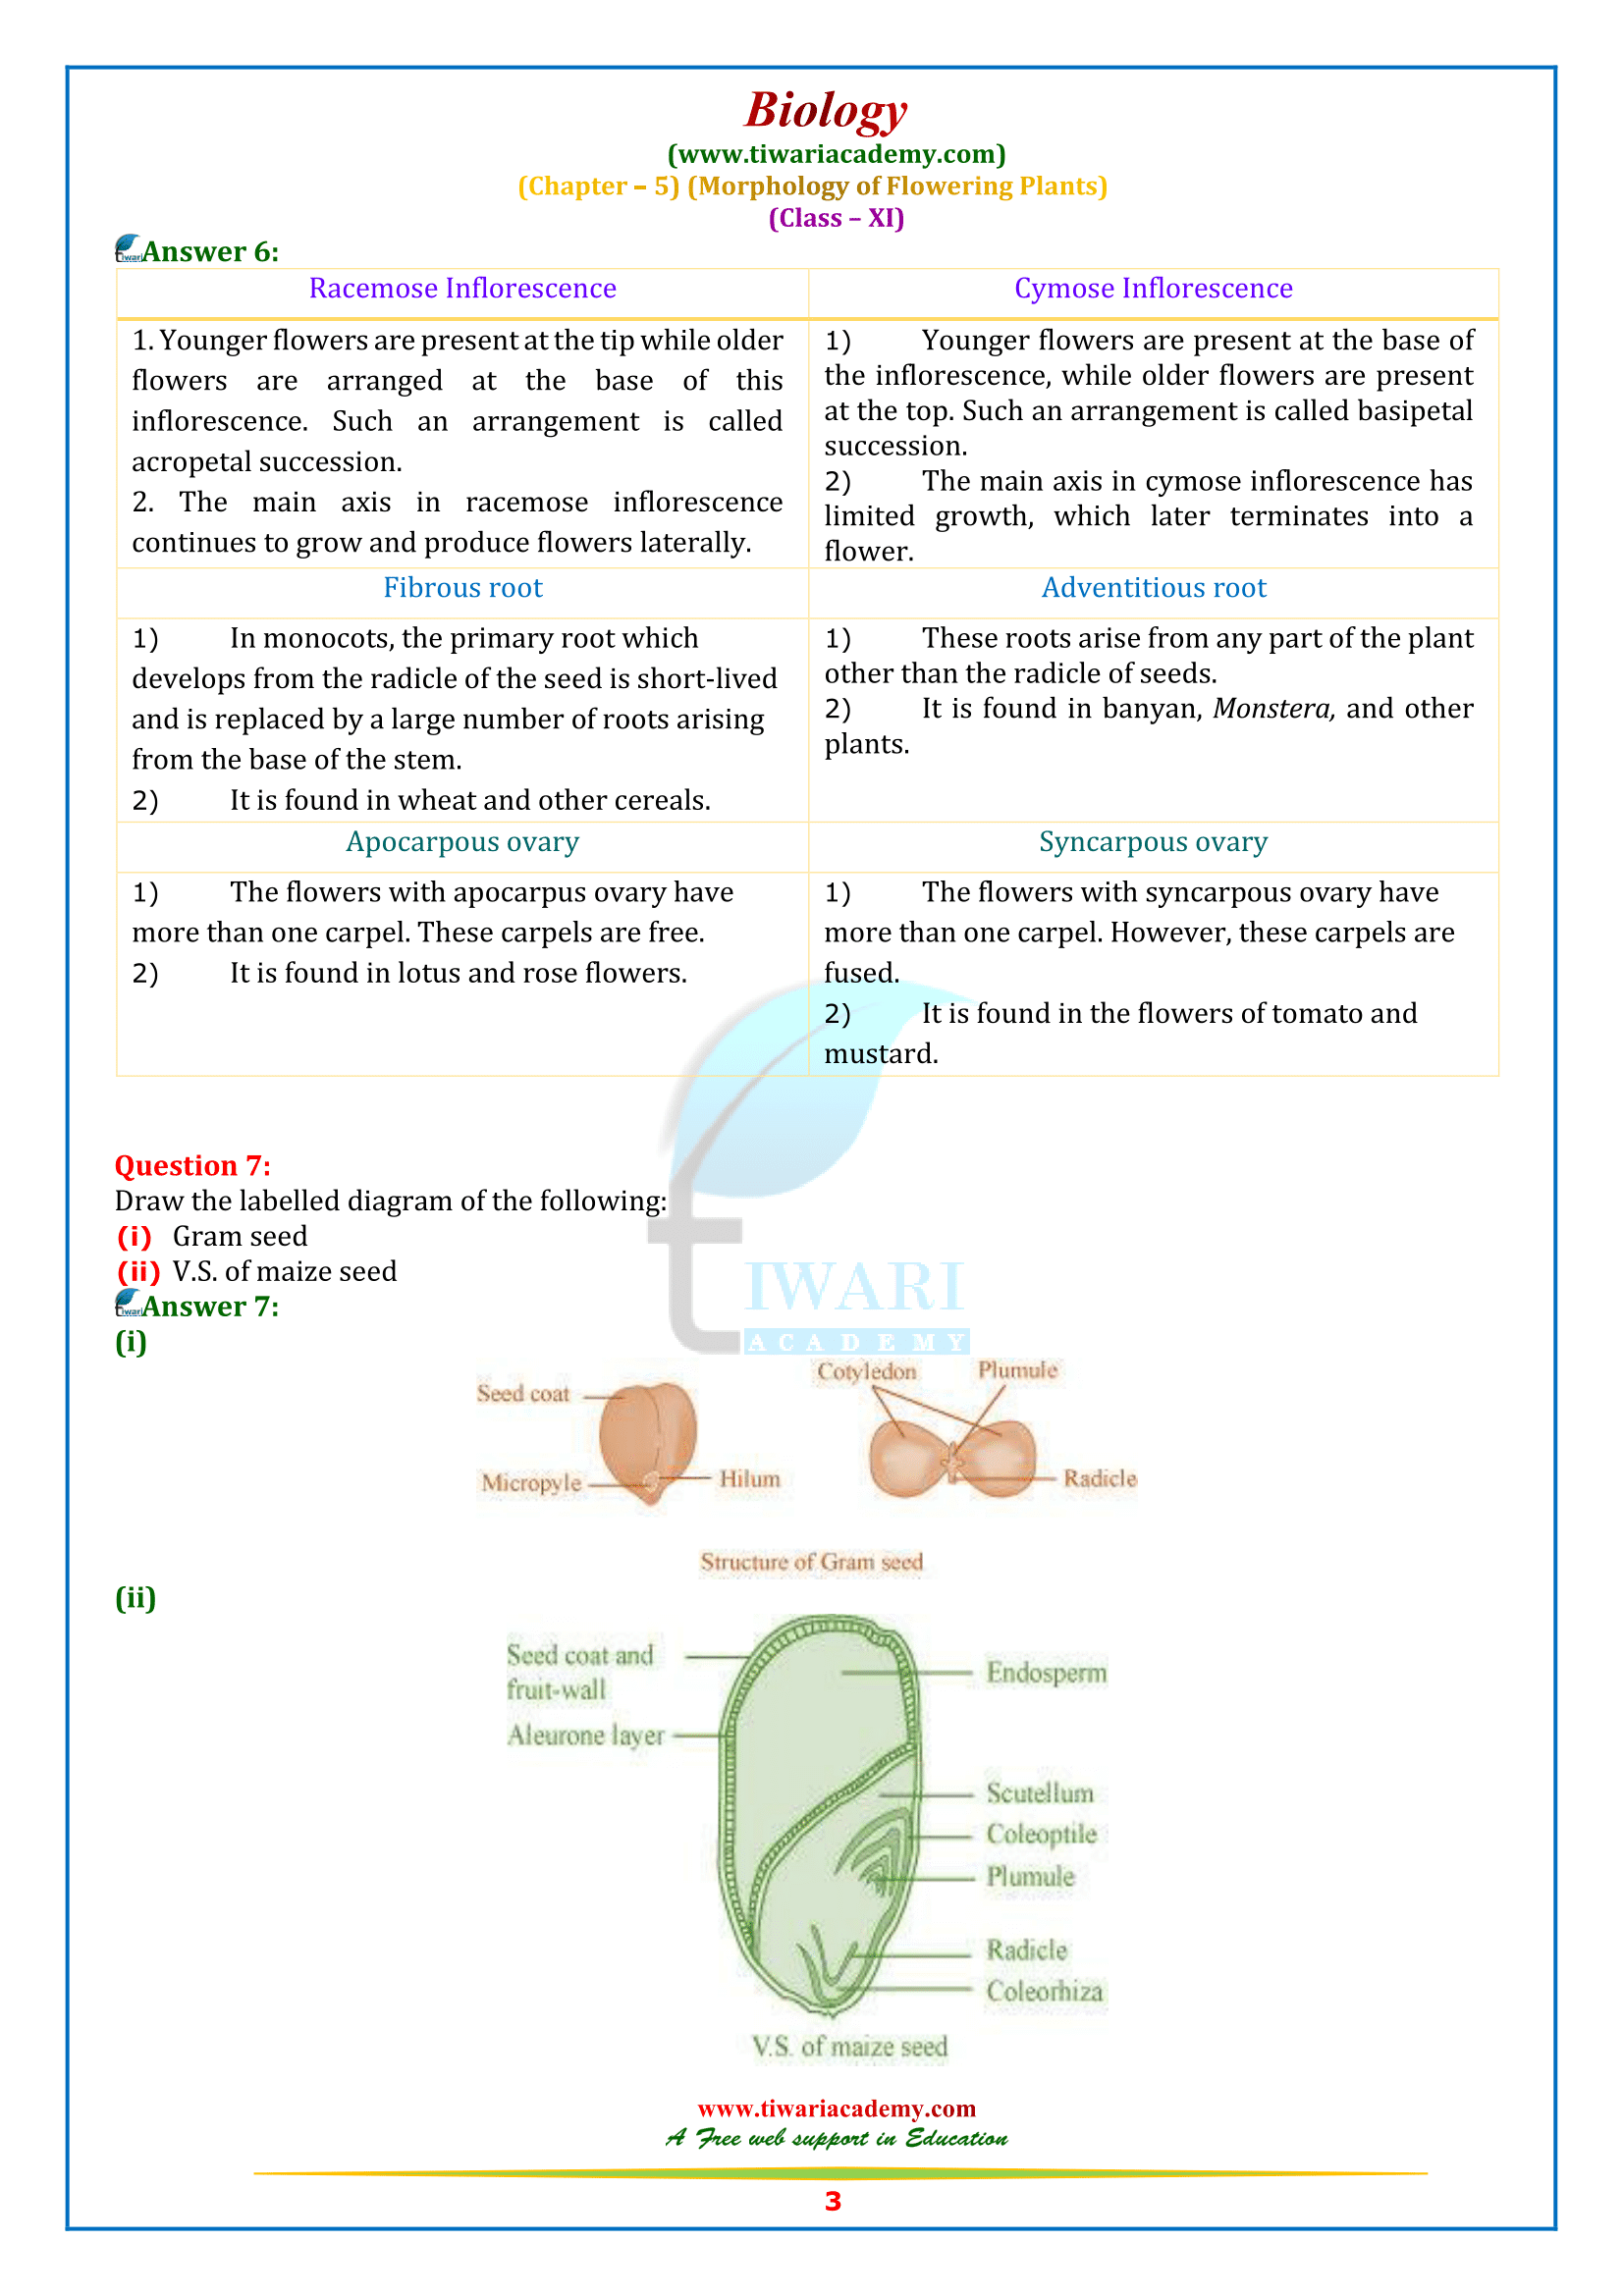 NCERT Solutions for Class 11 Biology Chapter 5 in English medium